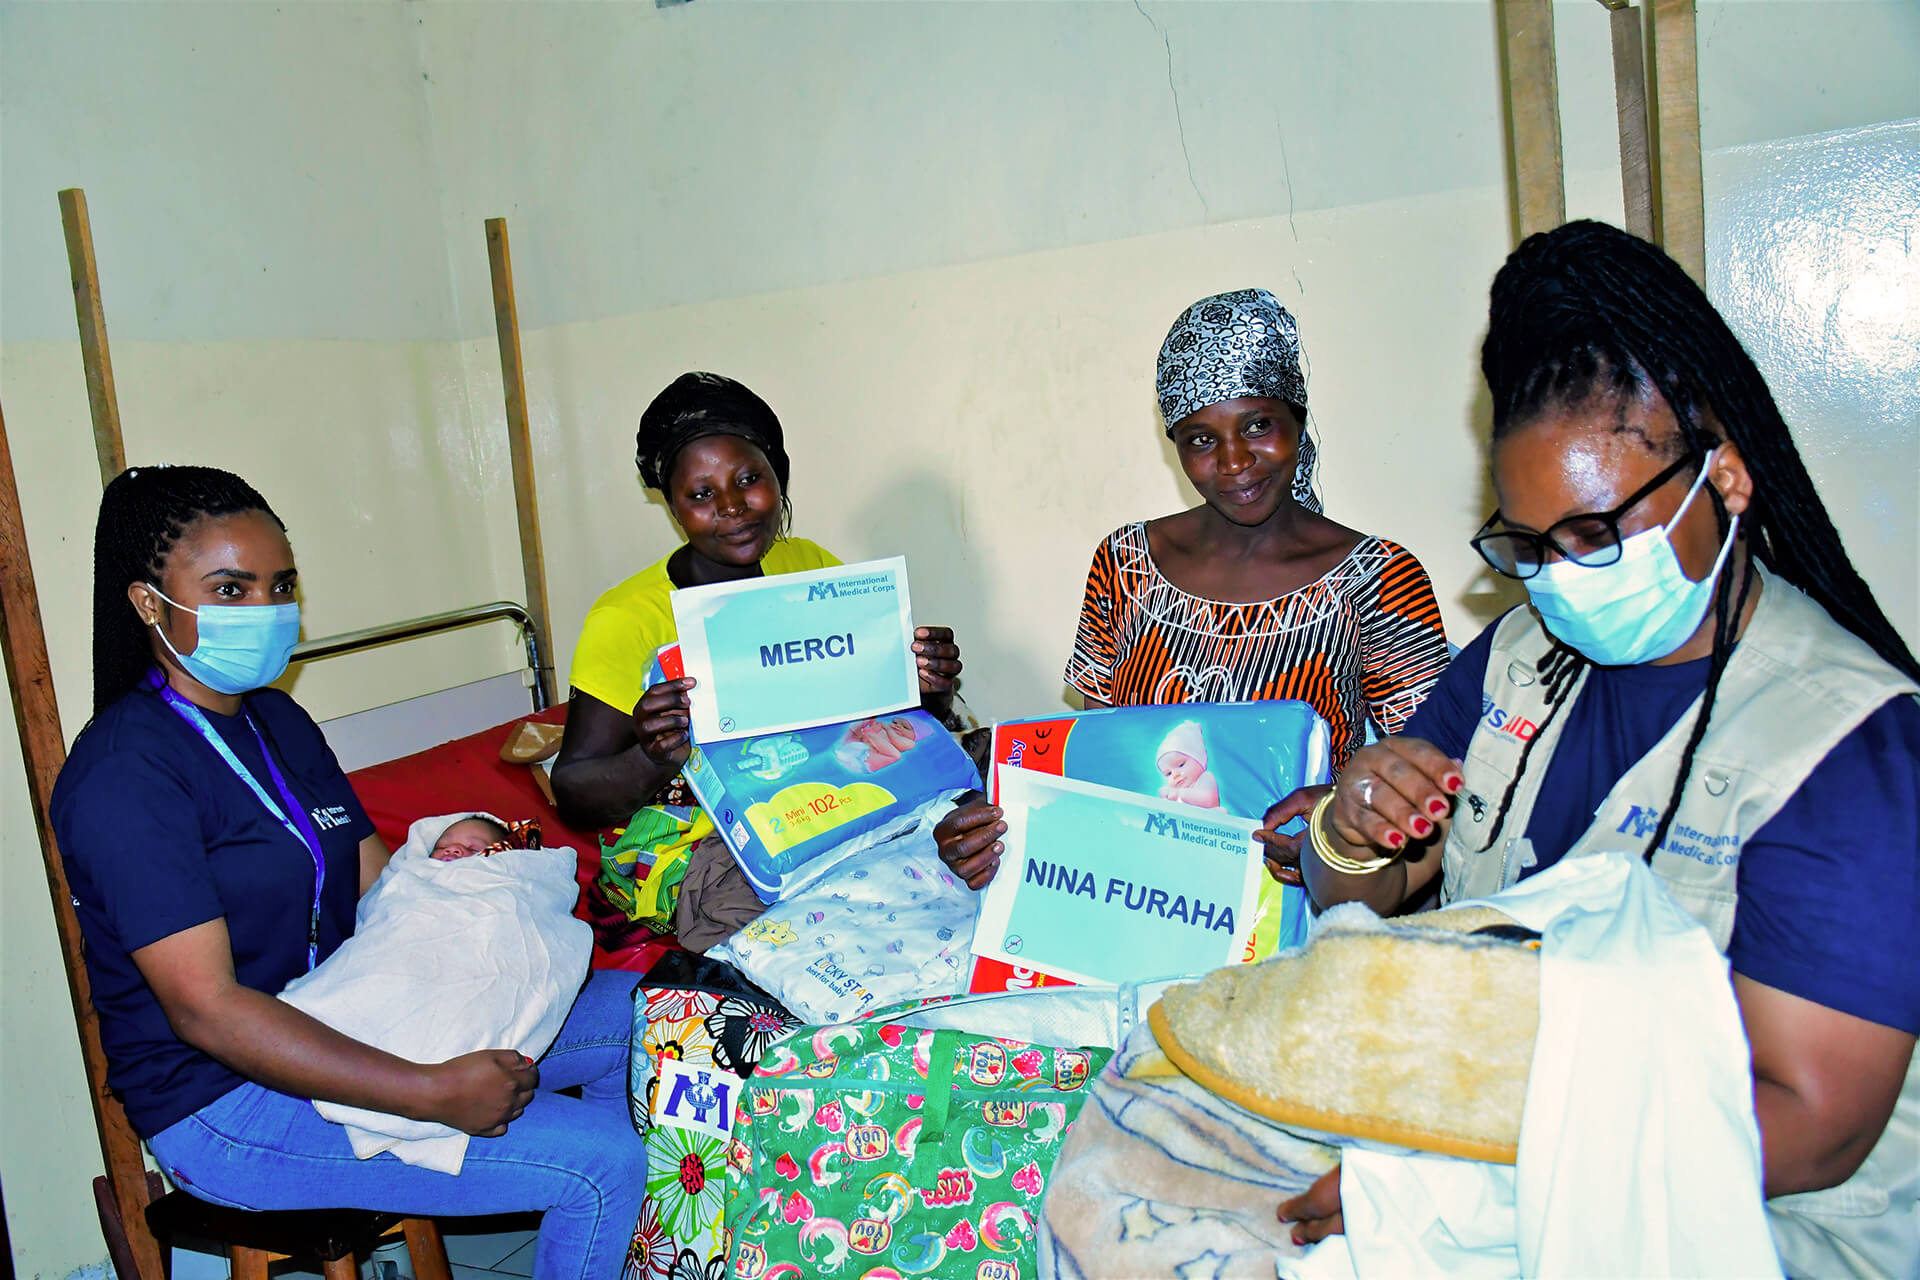 Asha Kisitu (far left) and Yvonne Uwimana (far right) cradle the babies of women displaced by the Nyiragongo volcano eruption after handing out maternity kits.